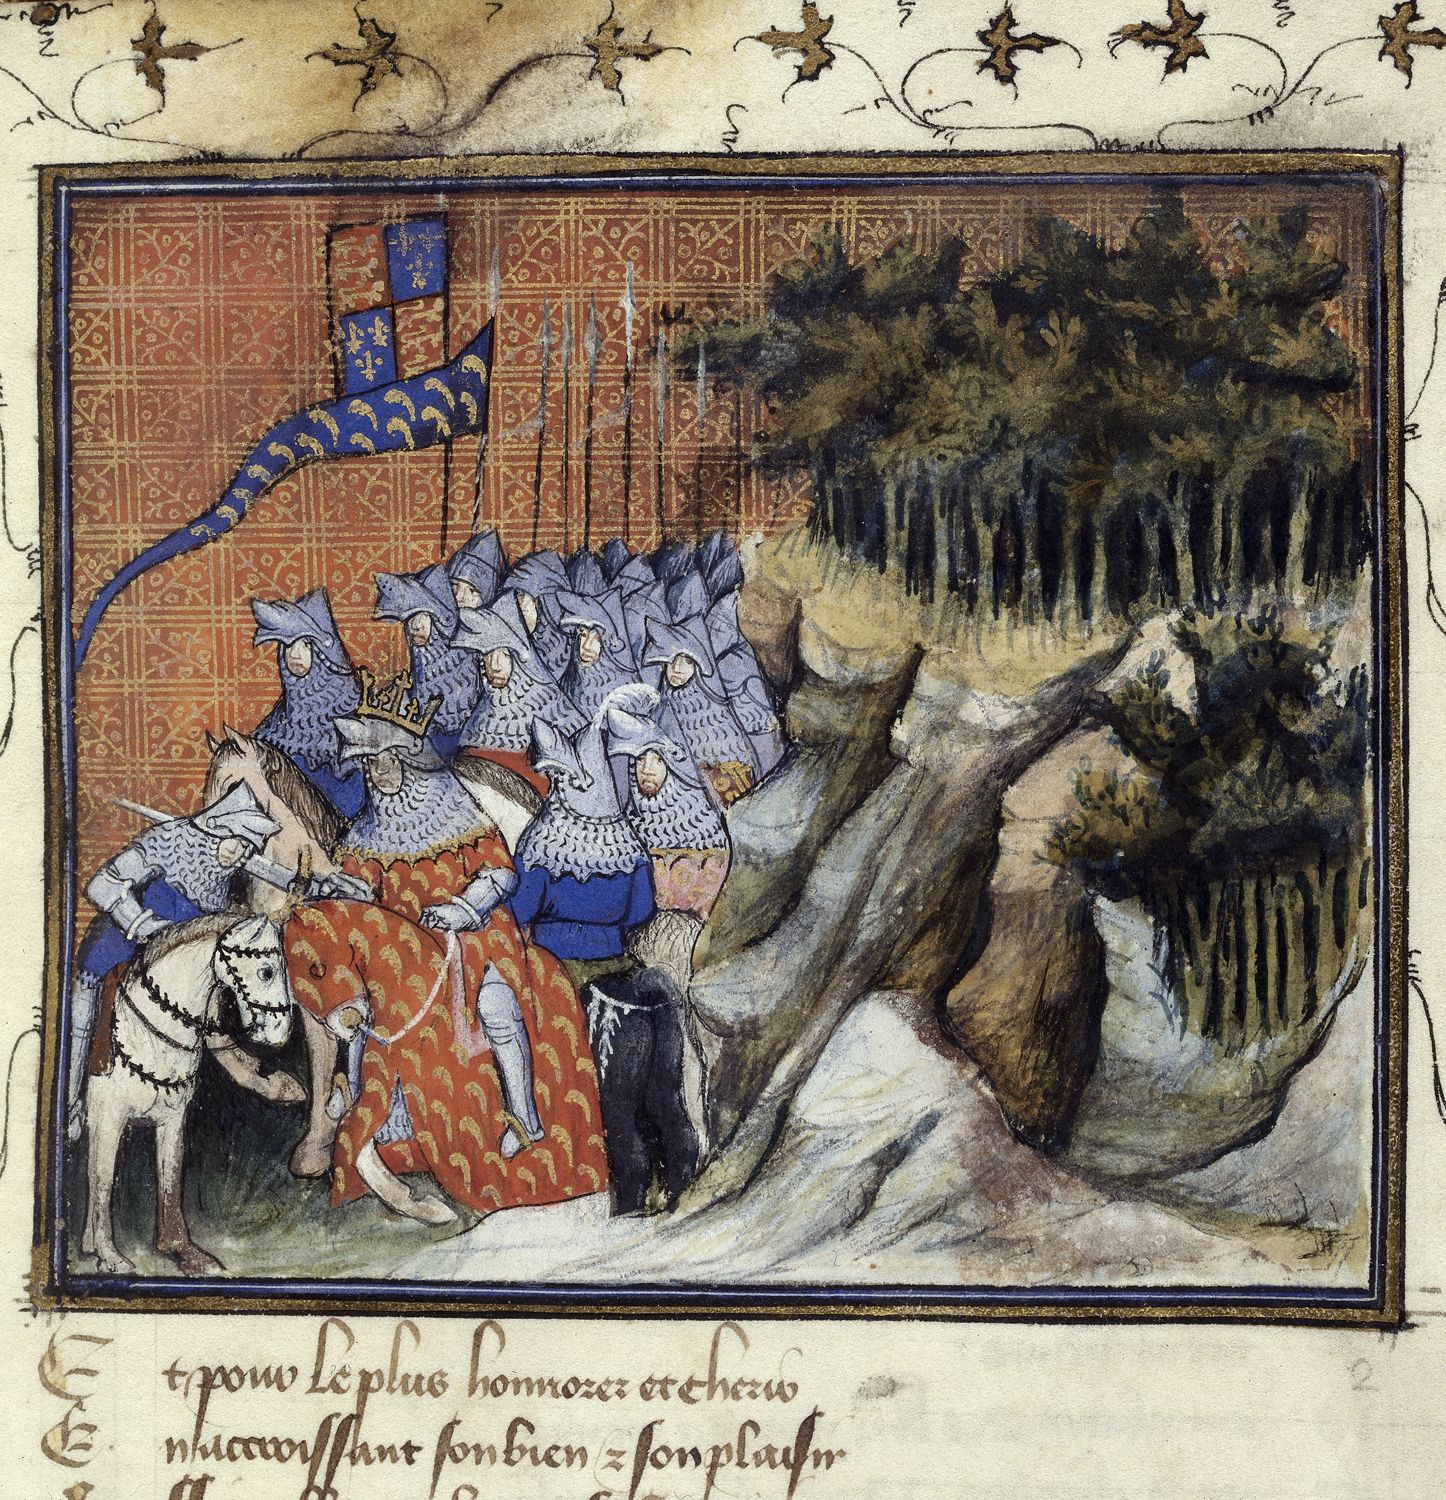 Miniature of Richard II knighting Henry of Monmouth from BL Harley 1319. The painting shows Richard and his men mounted in front of a copse of trees with Richard's sword on Henry's shoulder.